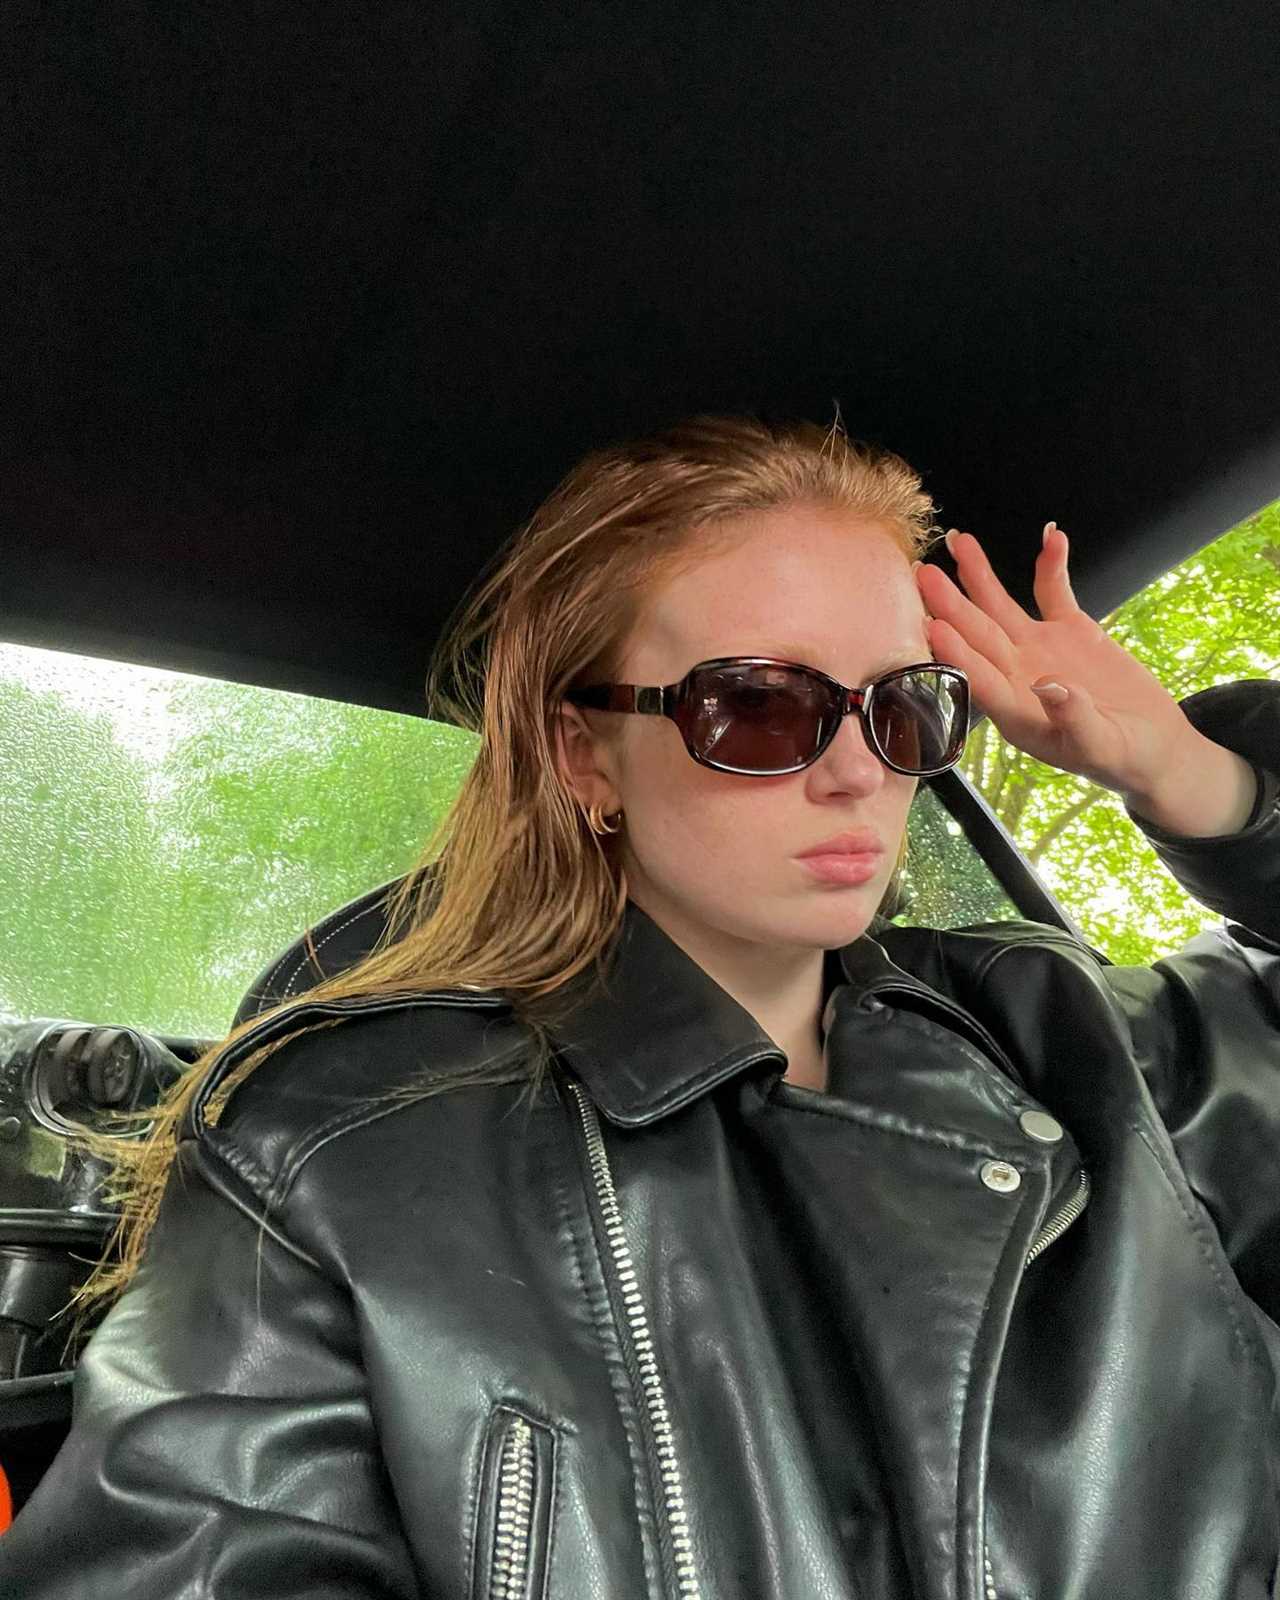 Makeup free Maisie Smith looks totally different as she shows off natural beauty